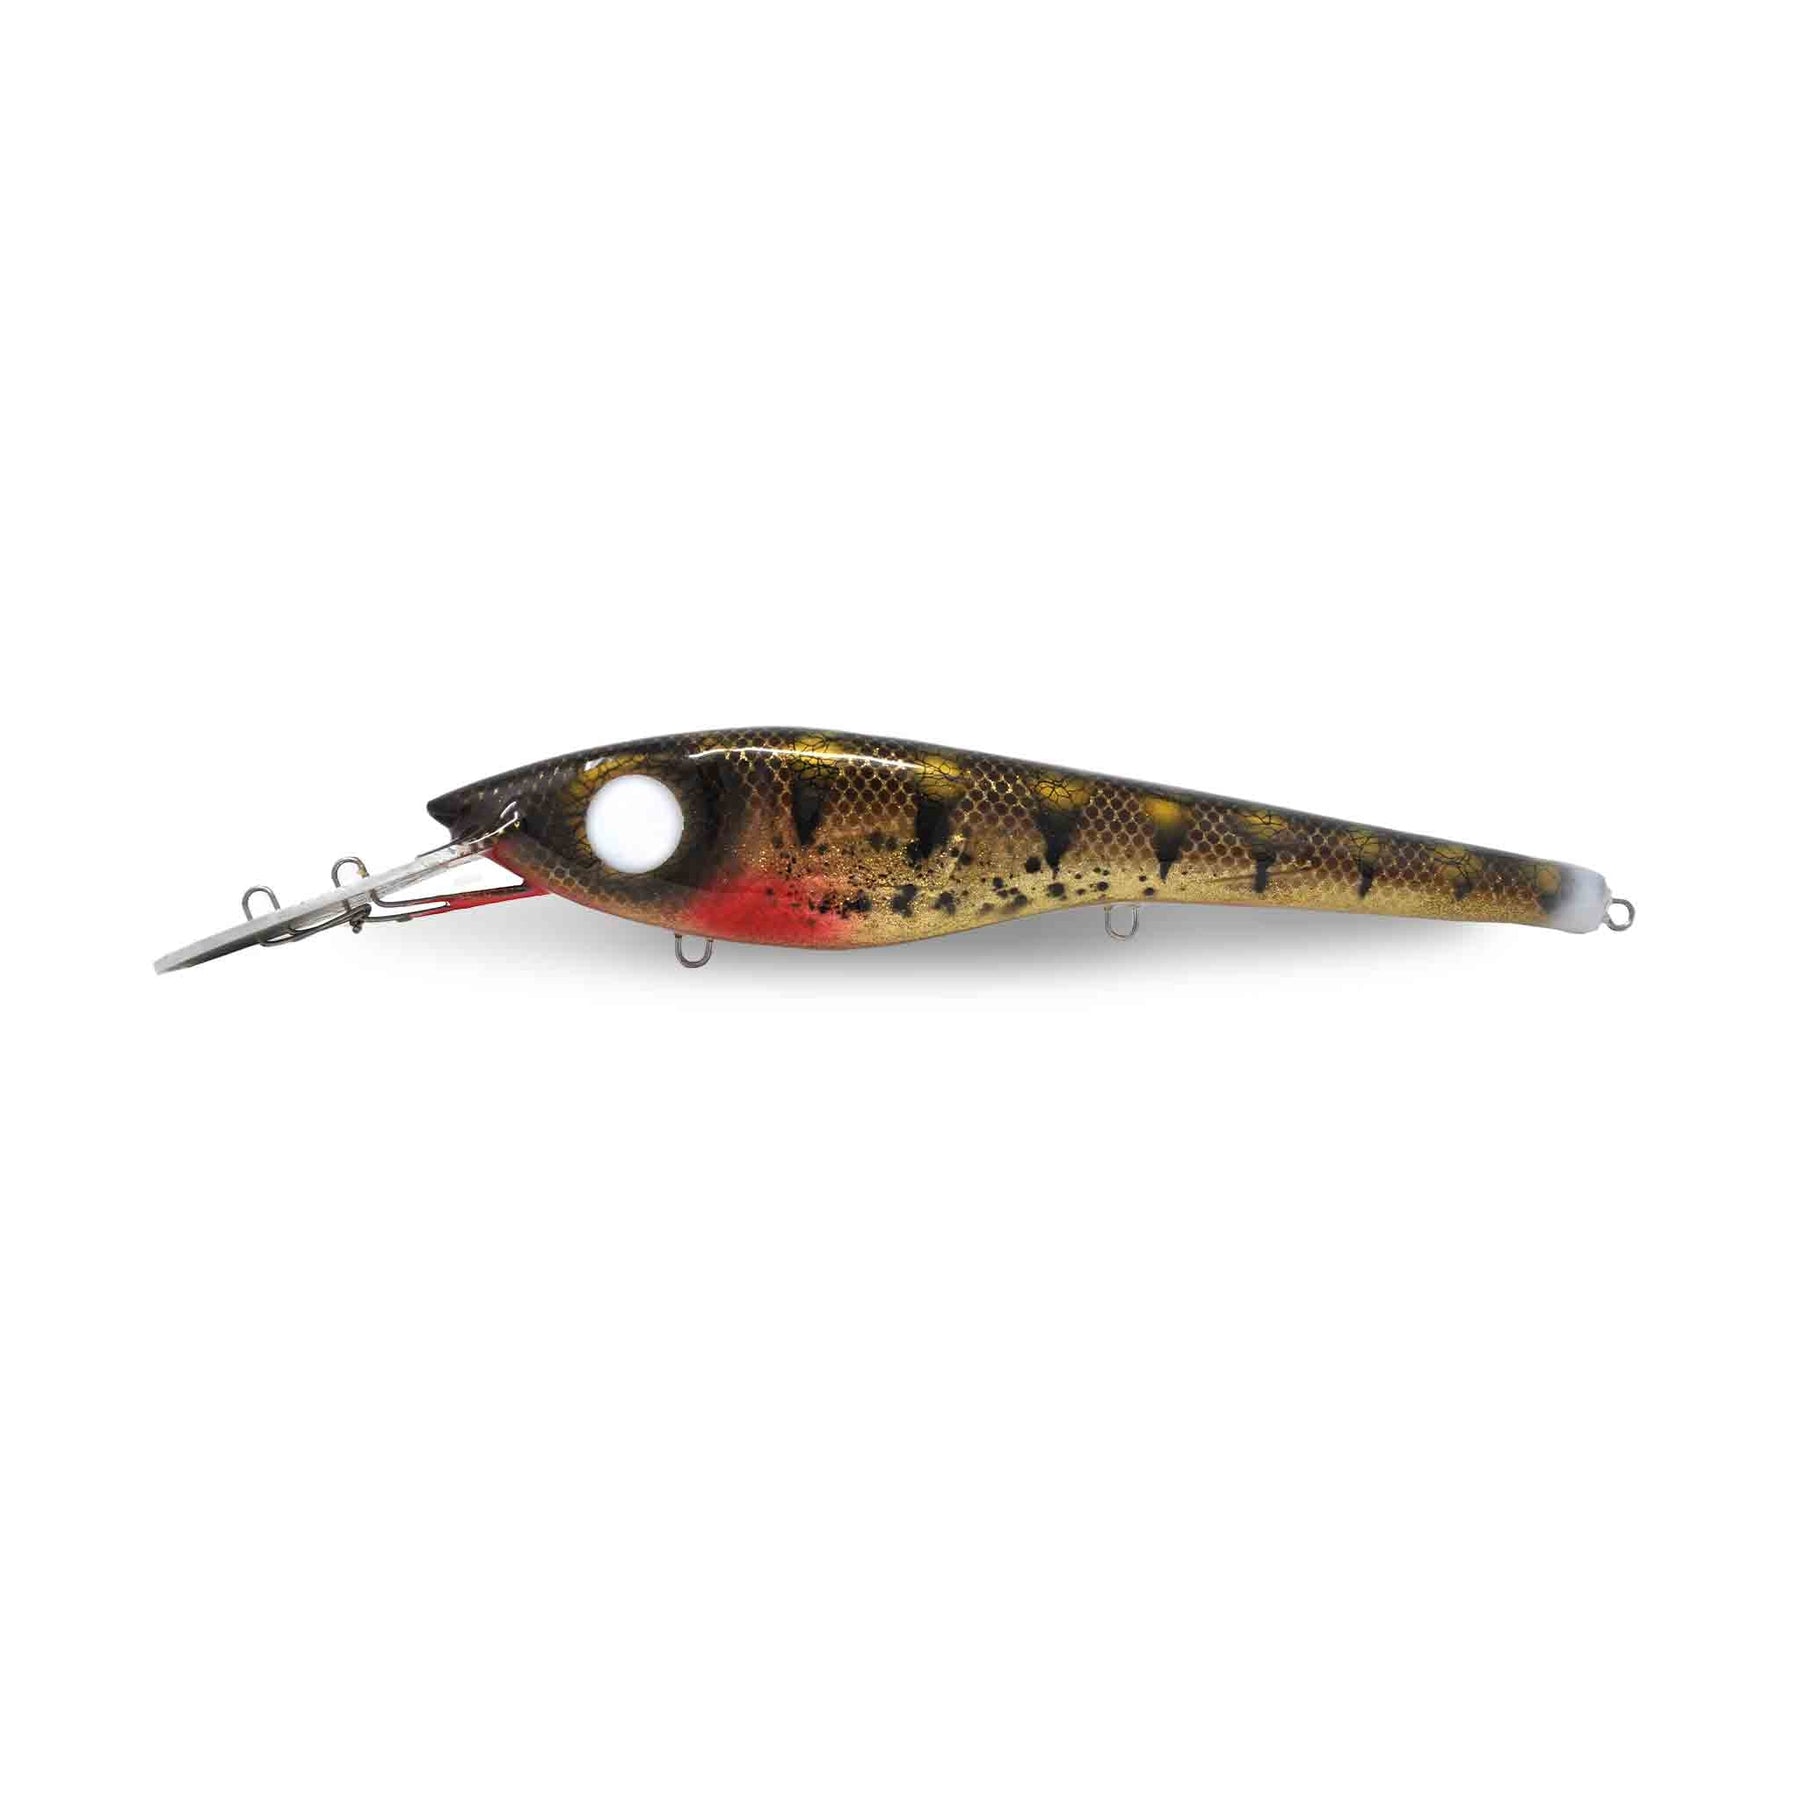 View of Crankbaits Scorpion MadBait 13'' Crankbait Walleye available at EZOKO Pike and Musky Shop